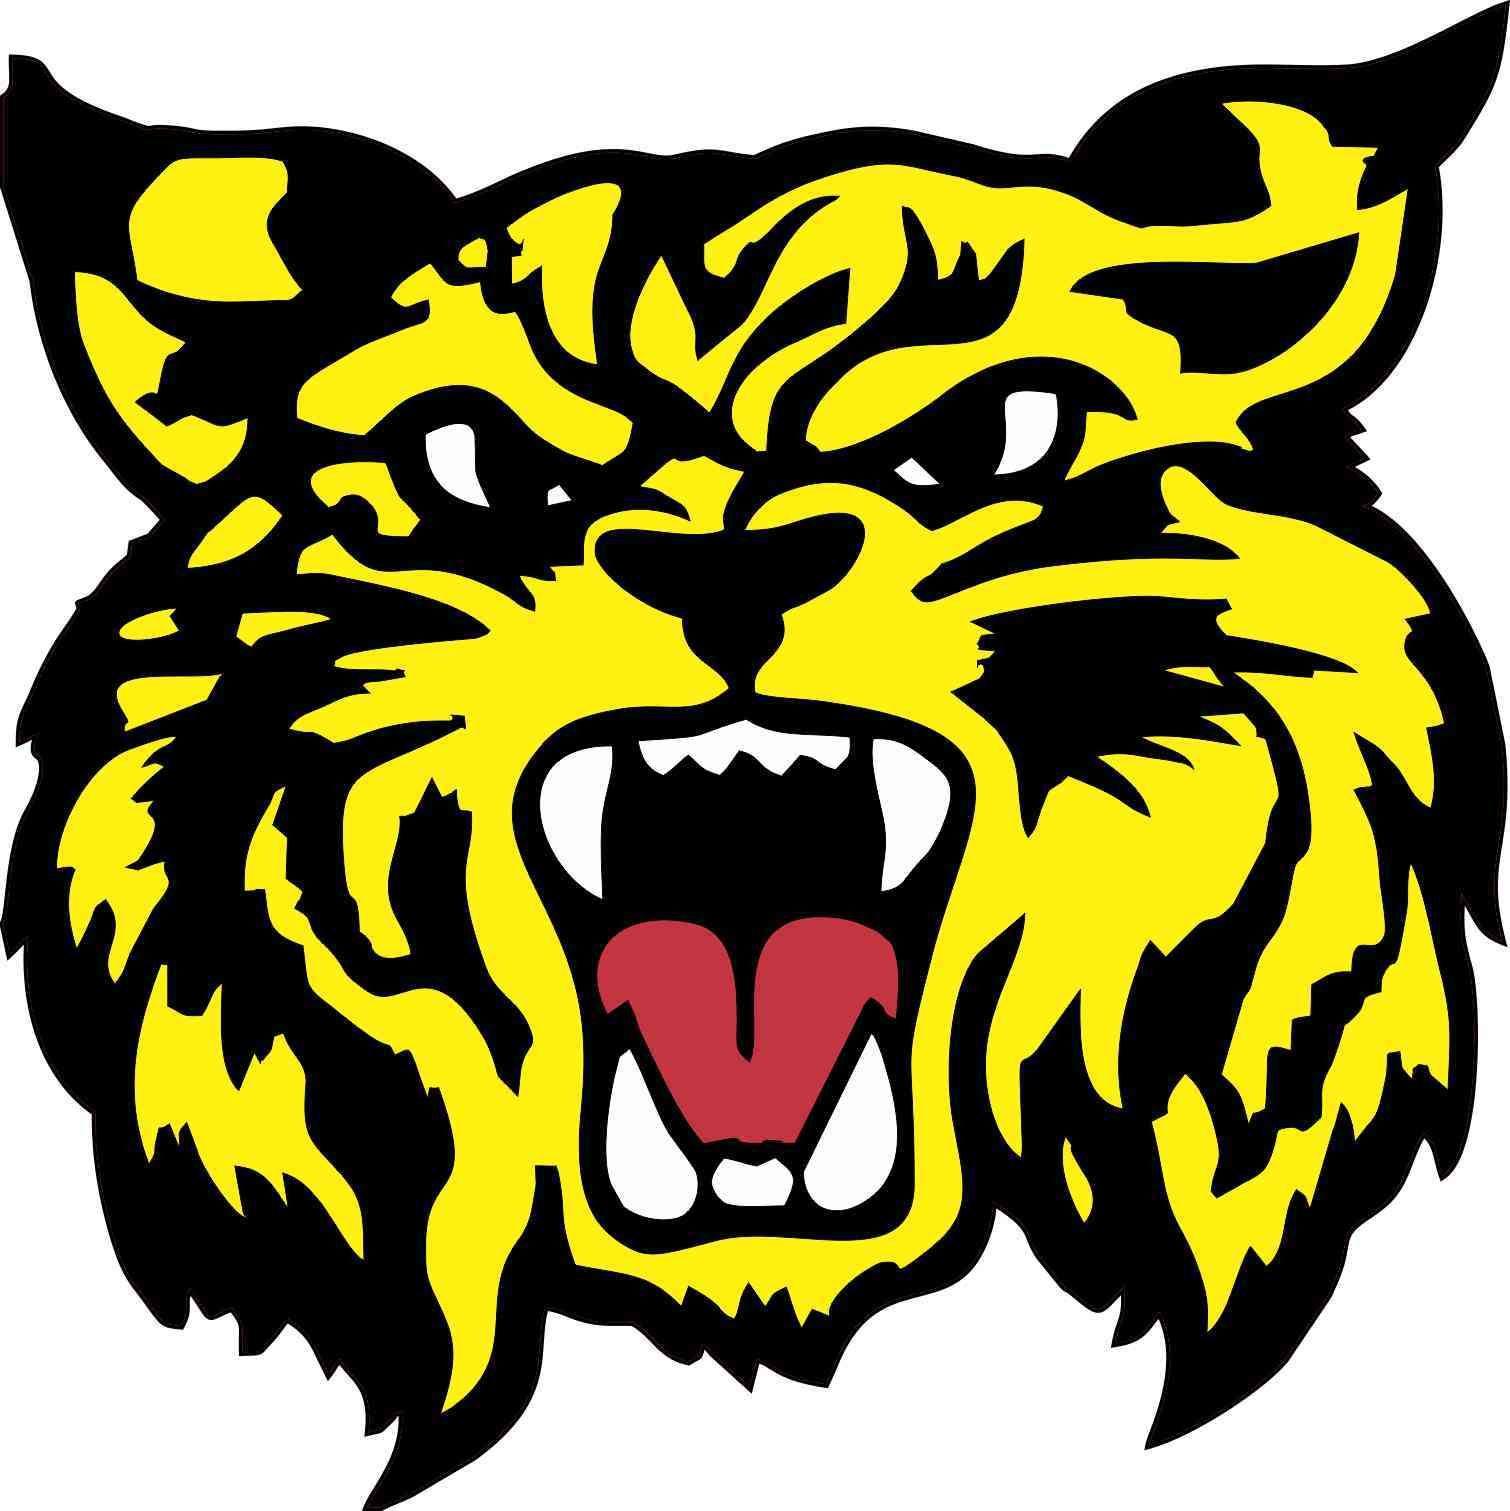 Black and Yellow Wildcats Logo - 10in x 10in Yellow Wildcat Sticker. Mascots. Stickers